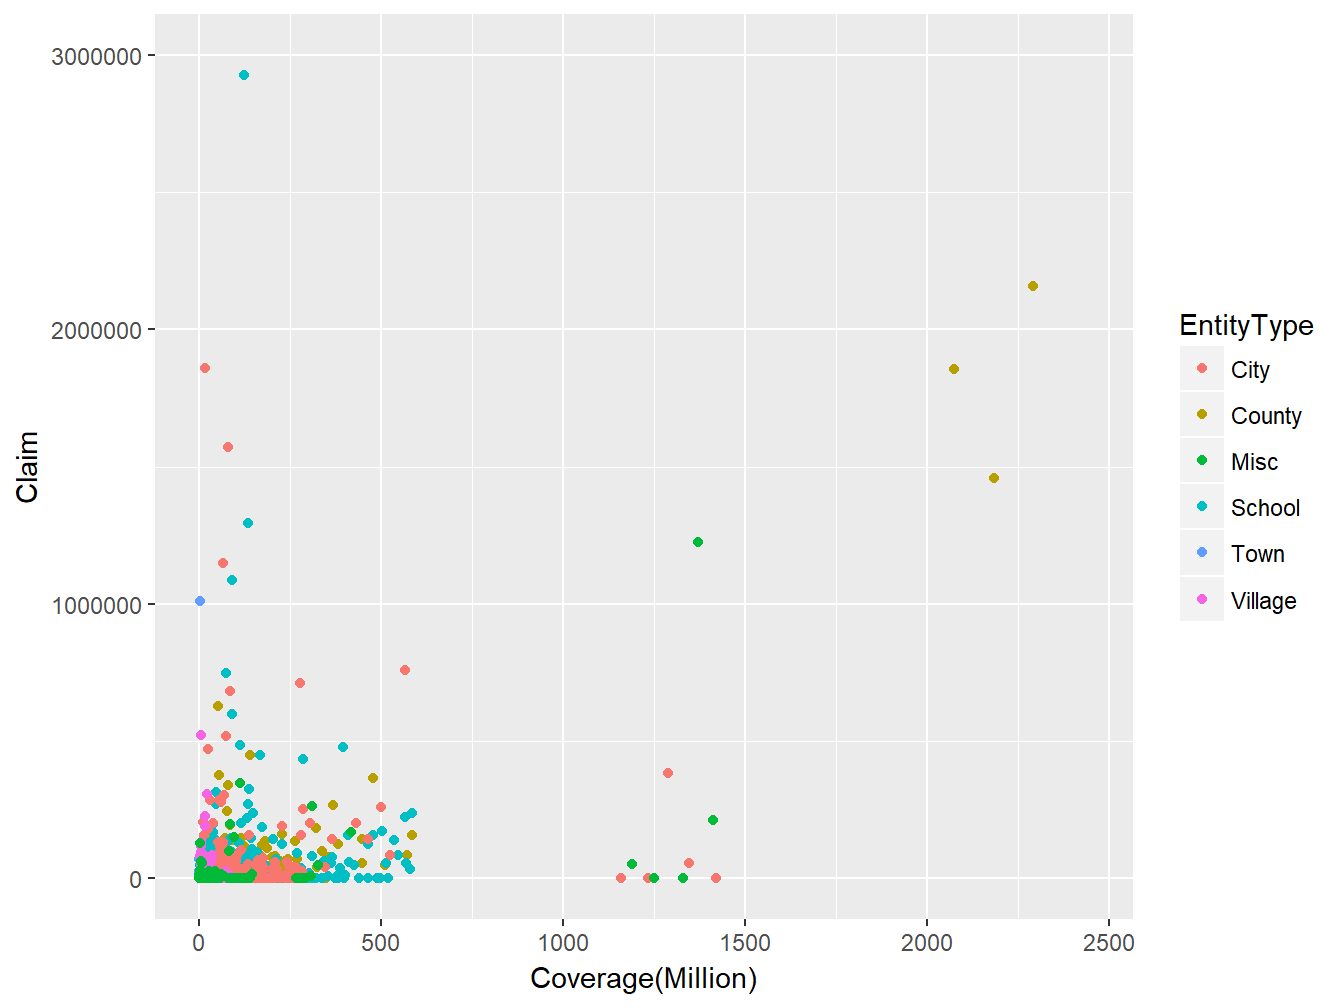 Scatter plot of *(Coverage,Claim)* from LGPIF data